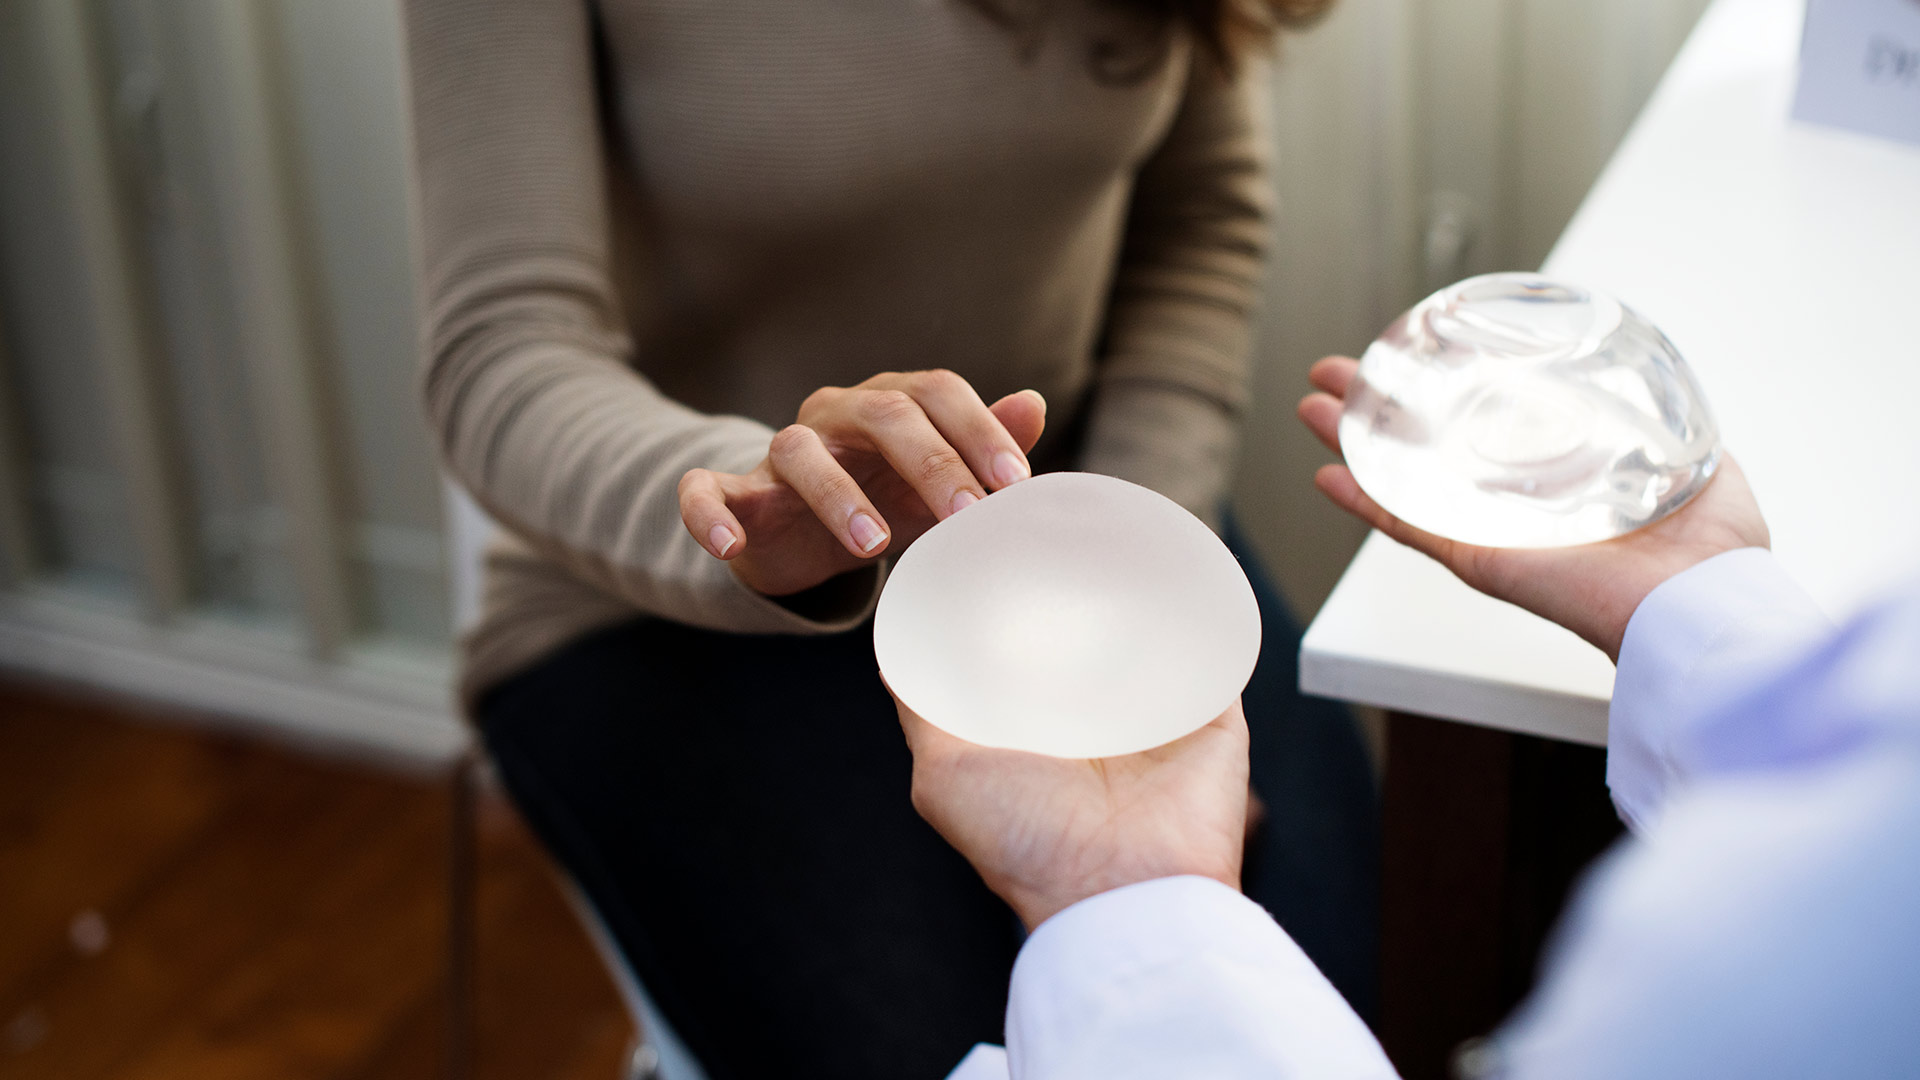 How Much Do Breast Implants Cost? Factors & Financing Options